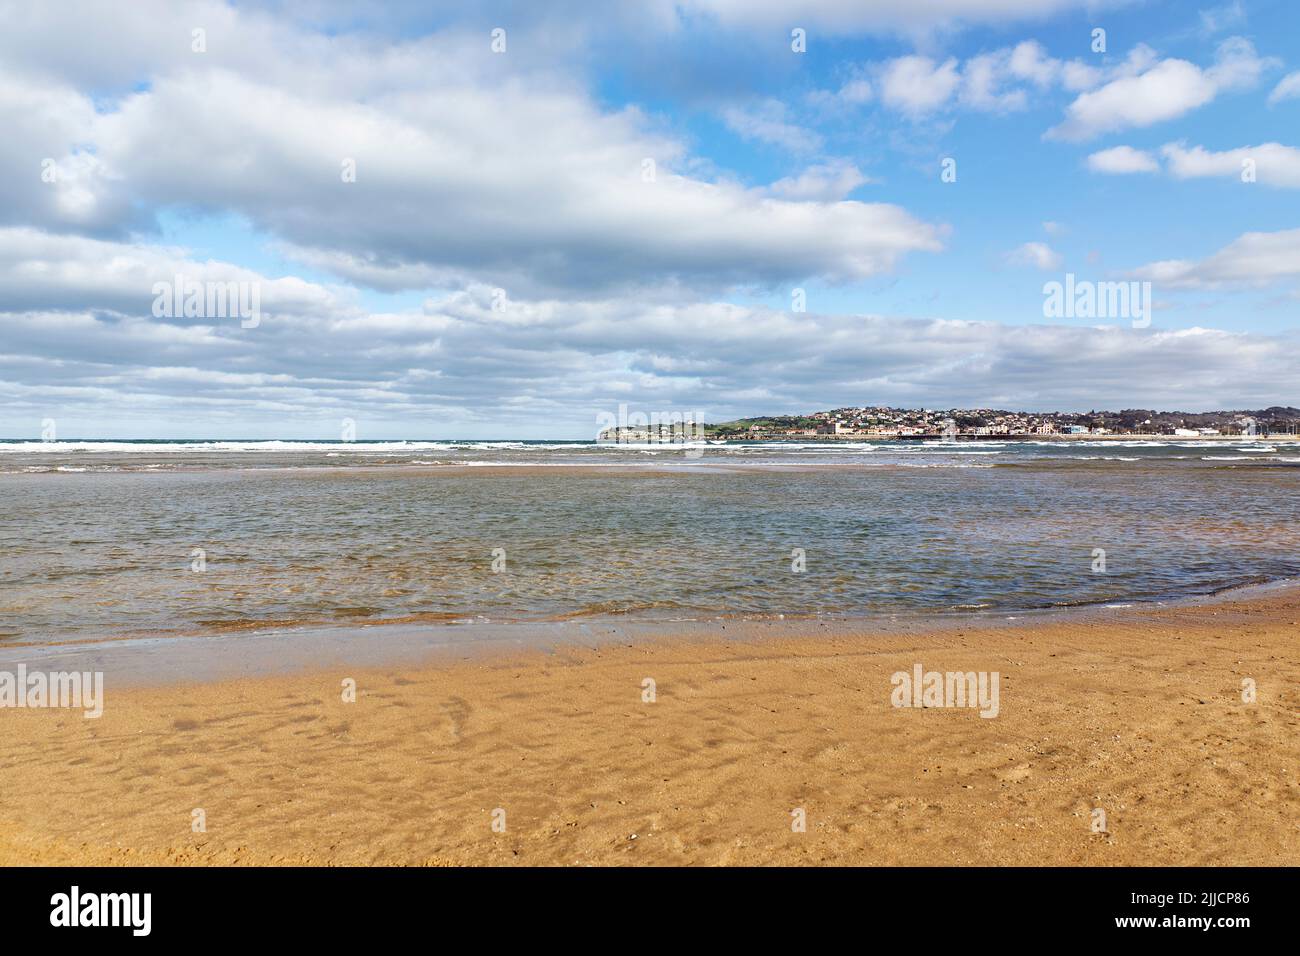 Beach overlooking the shore of a coastal city on a cloudy day. Concept travel, vacation Stock Photo